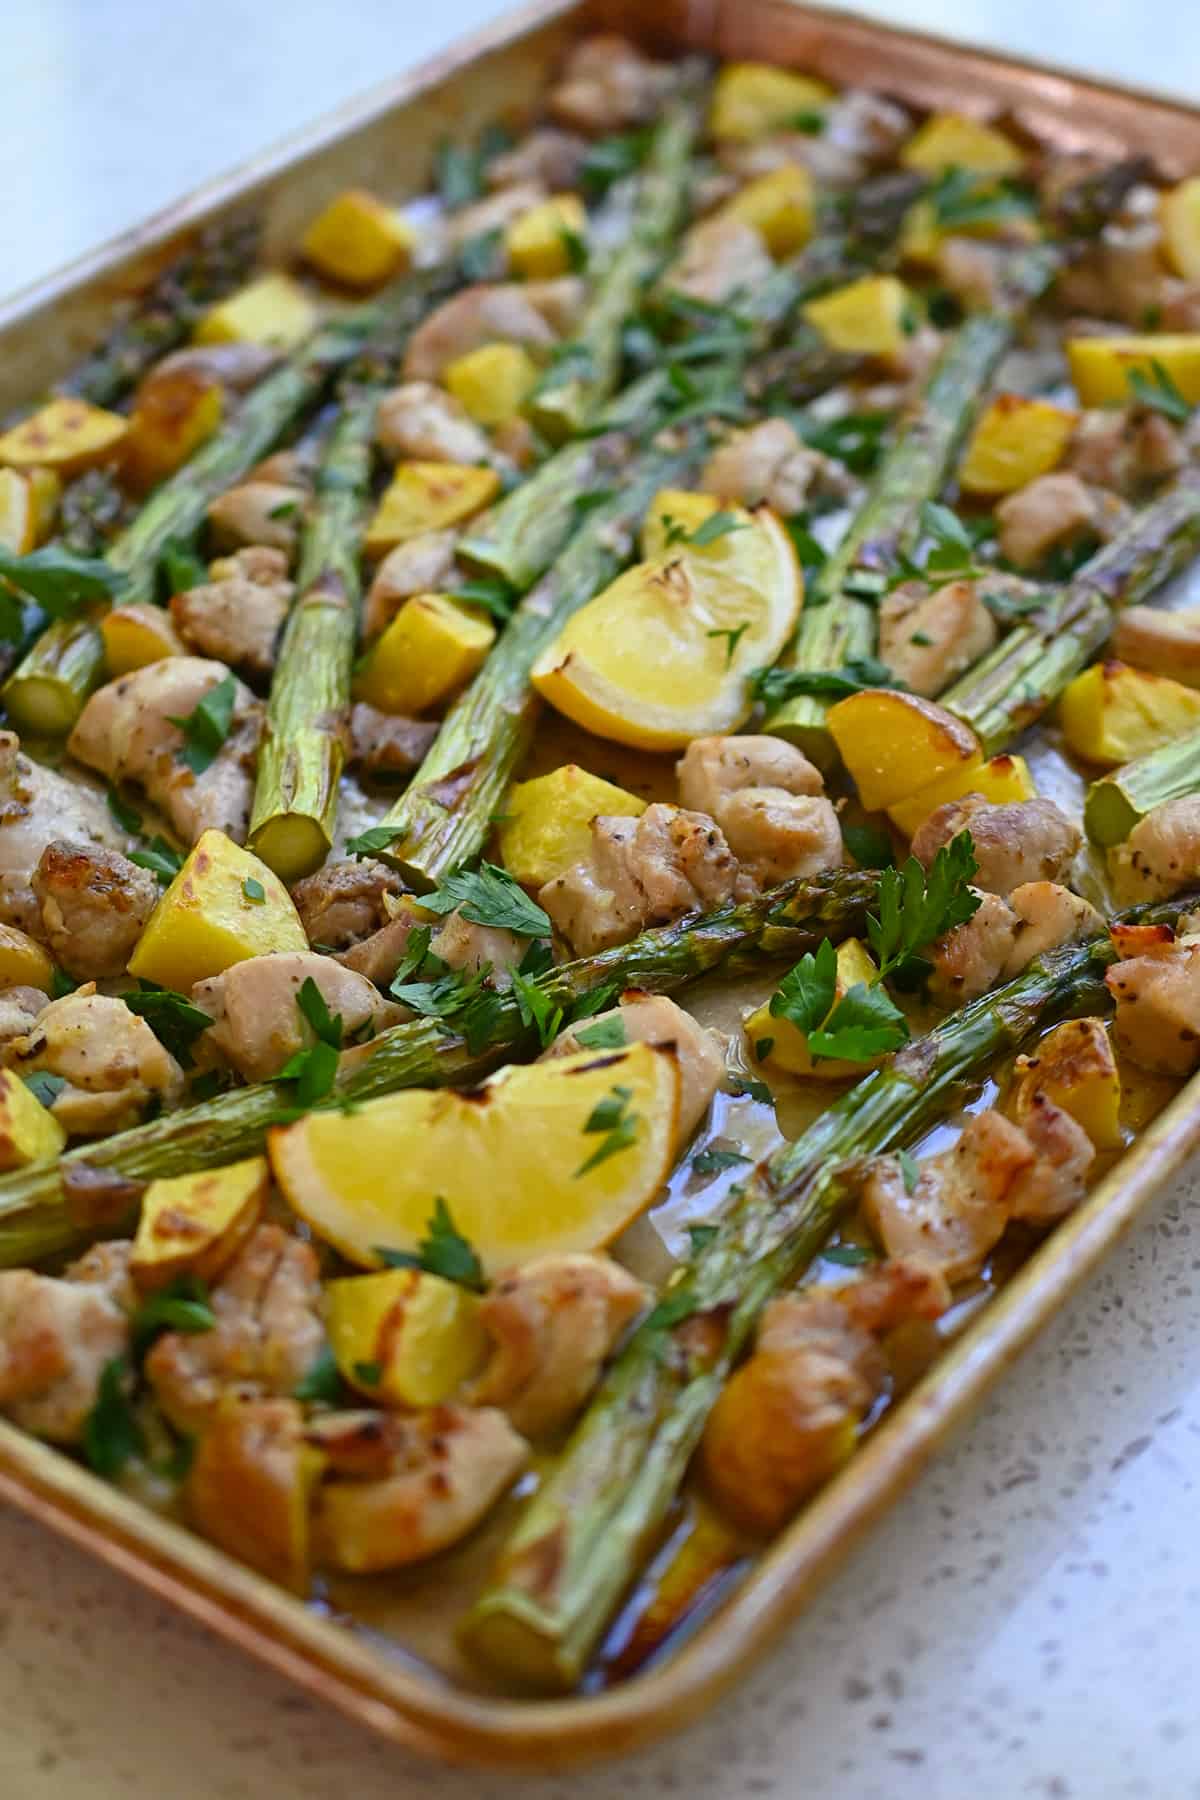 A side view of a Greek sheet pan chicken dinner with asparagus, potatoes, chicken, and lemon wedges.